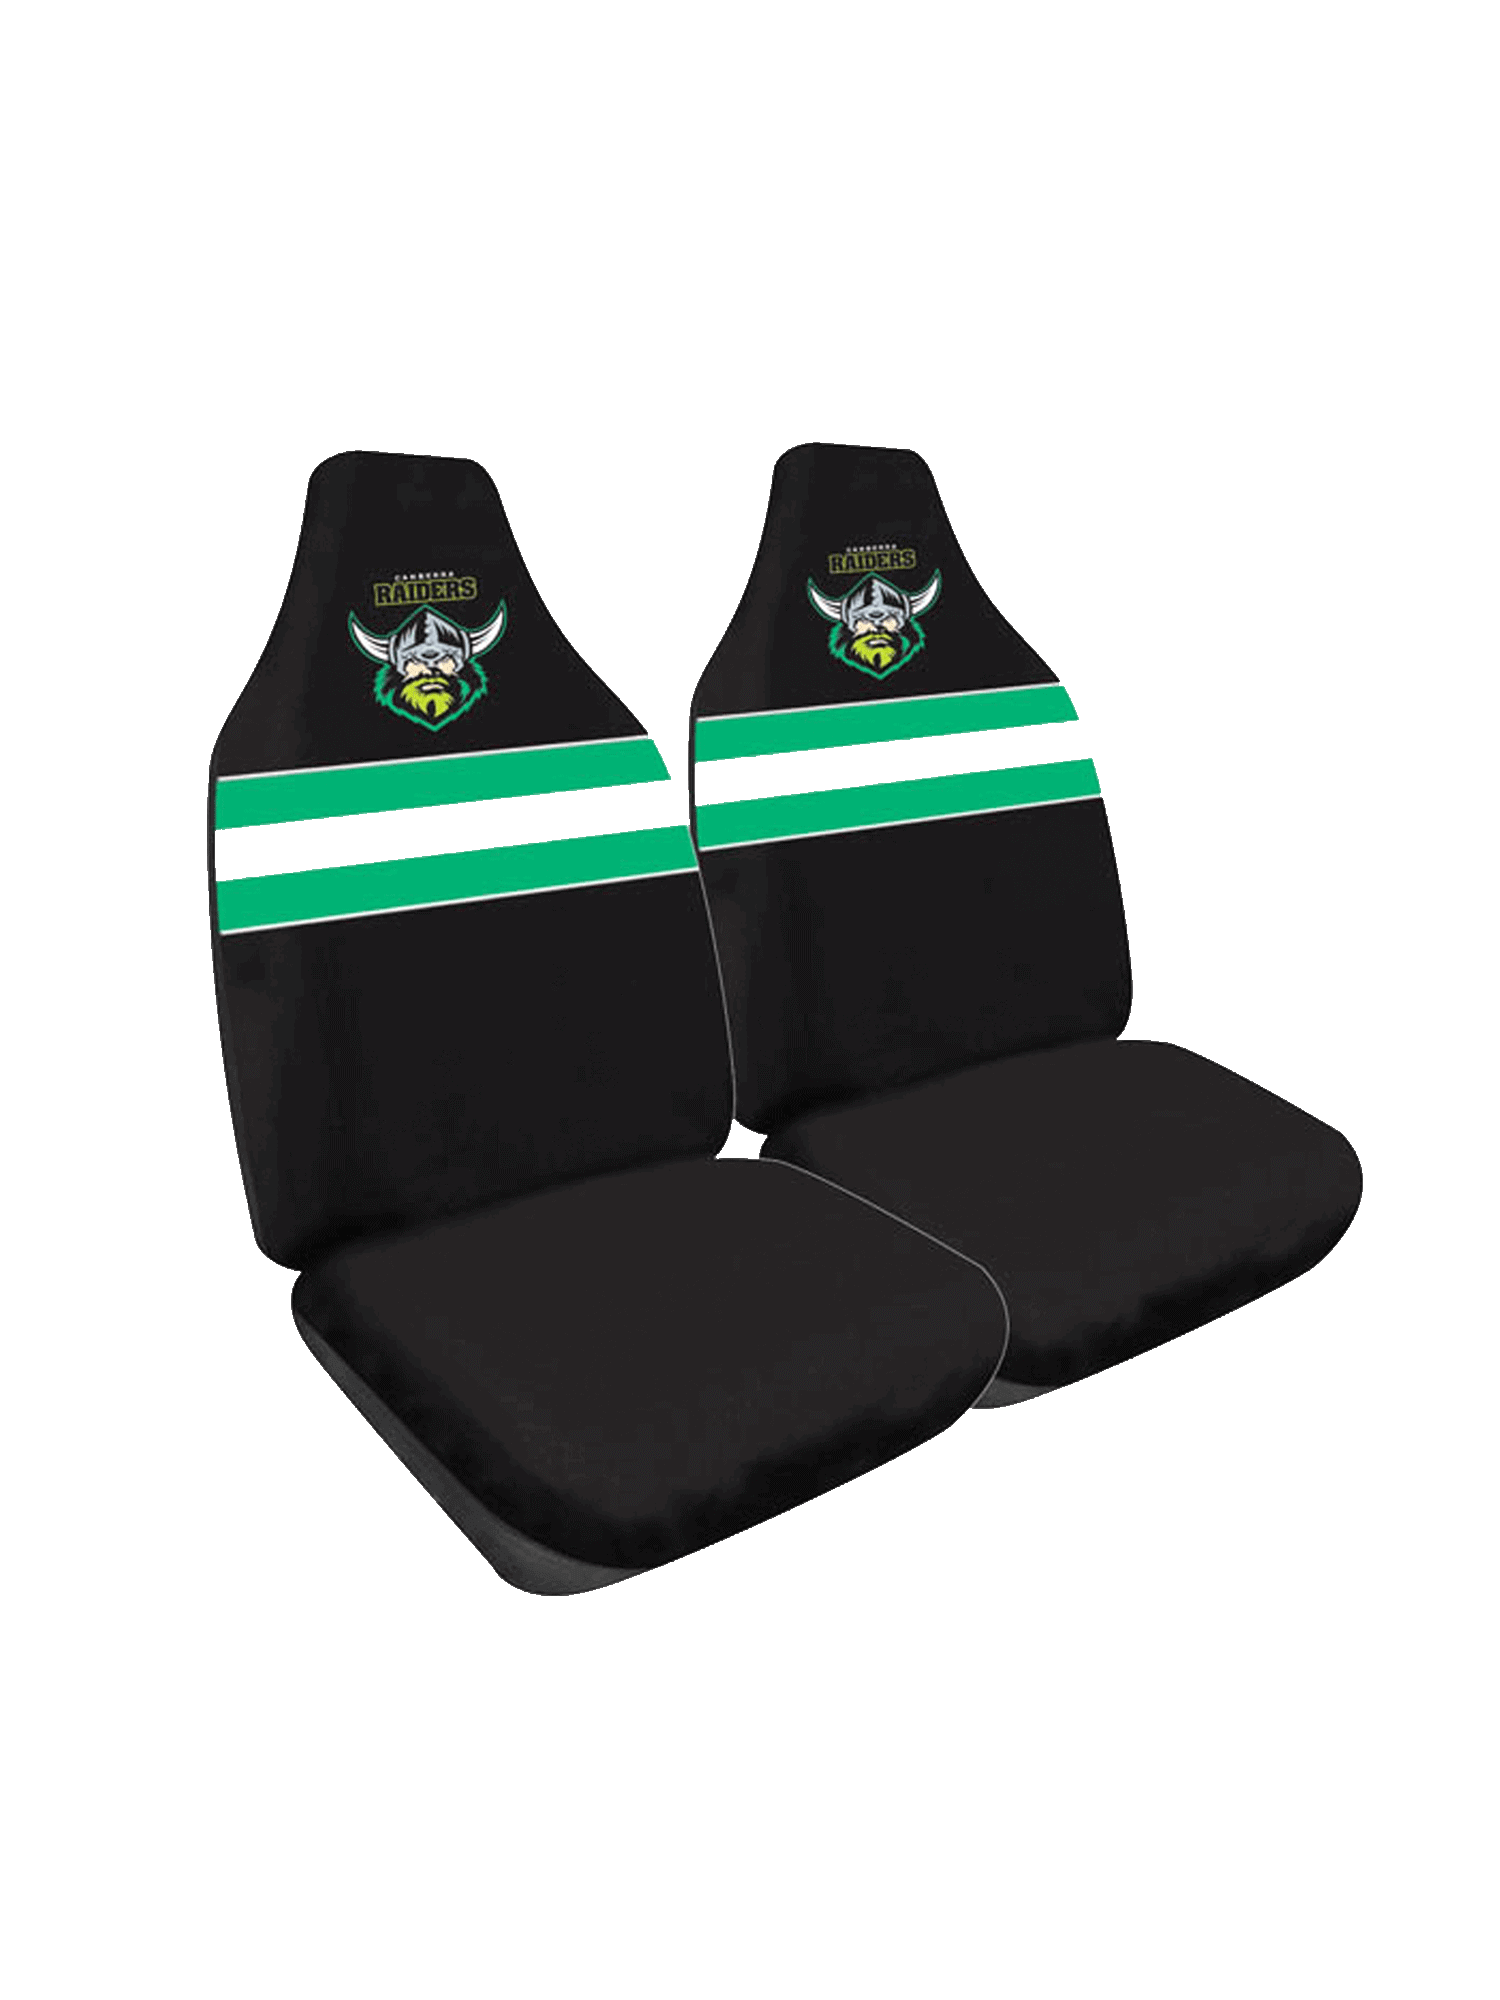 CANBERRA RAIDERS CAR SEAT COVERS_CANBERRA RAIDERS_ STUBBY CLUB